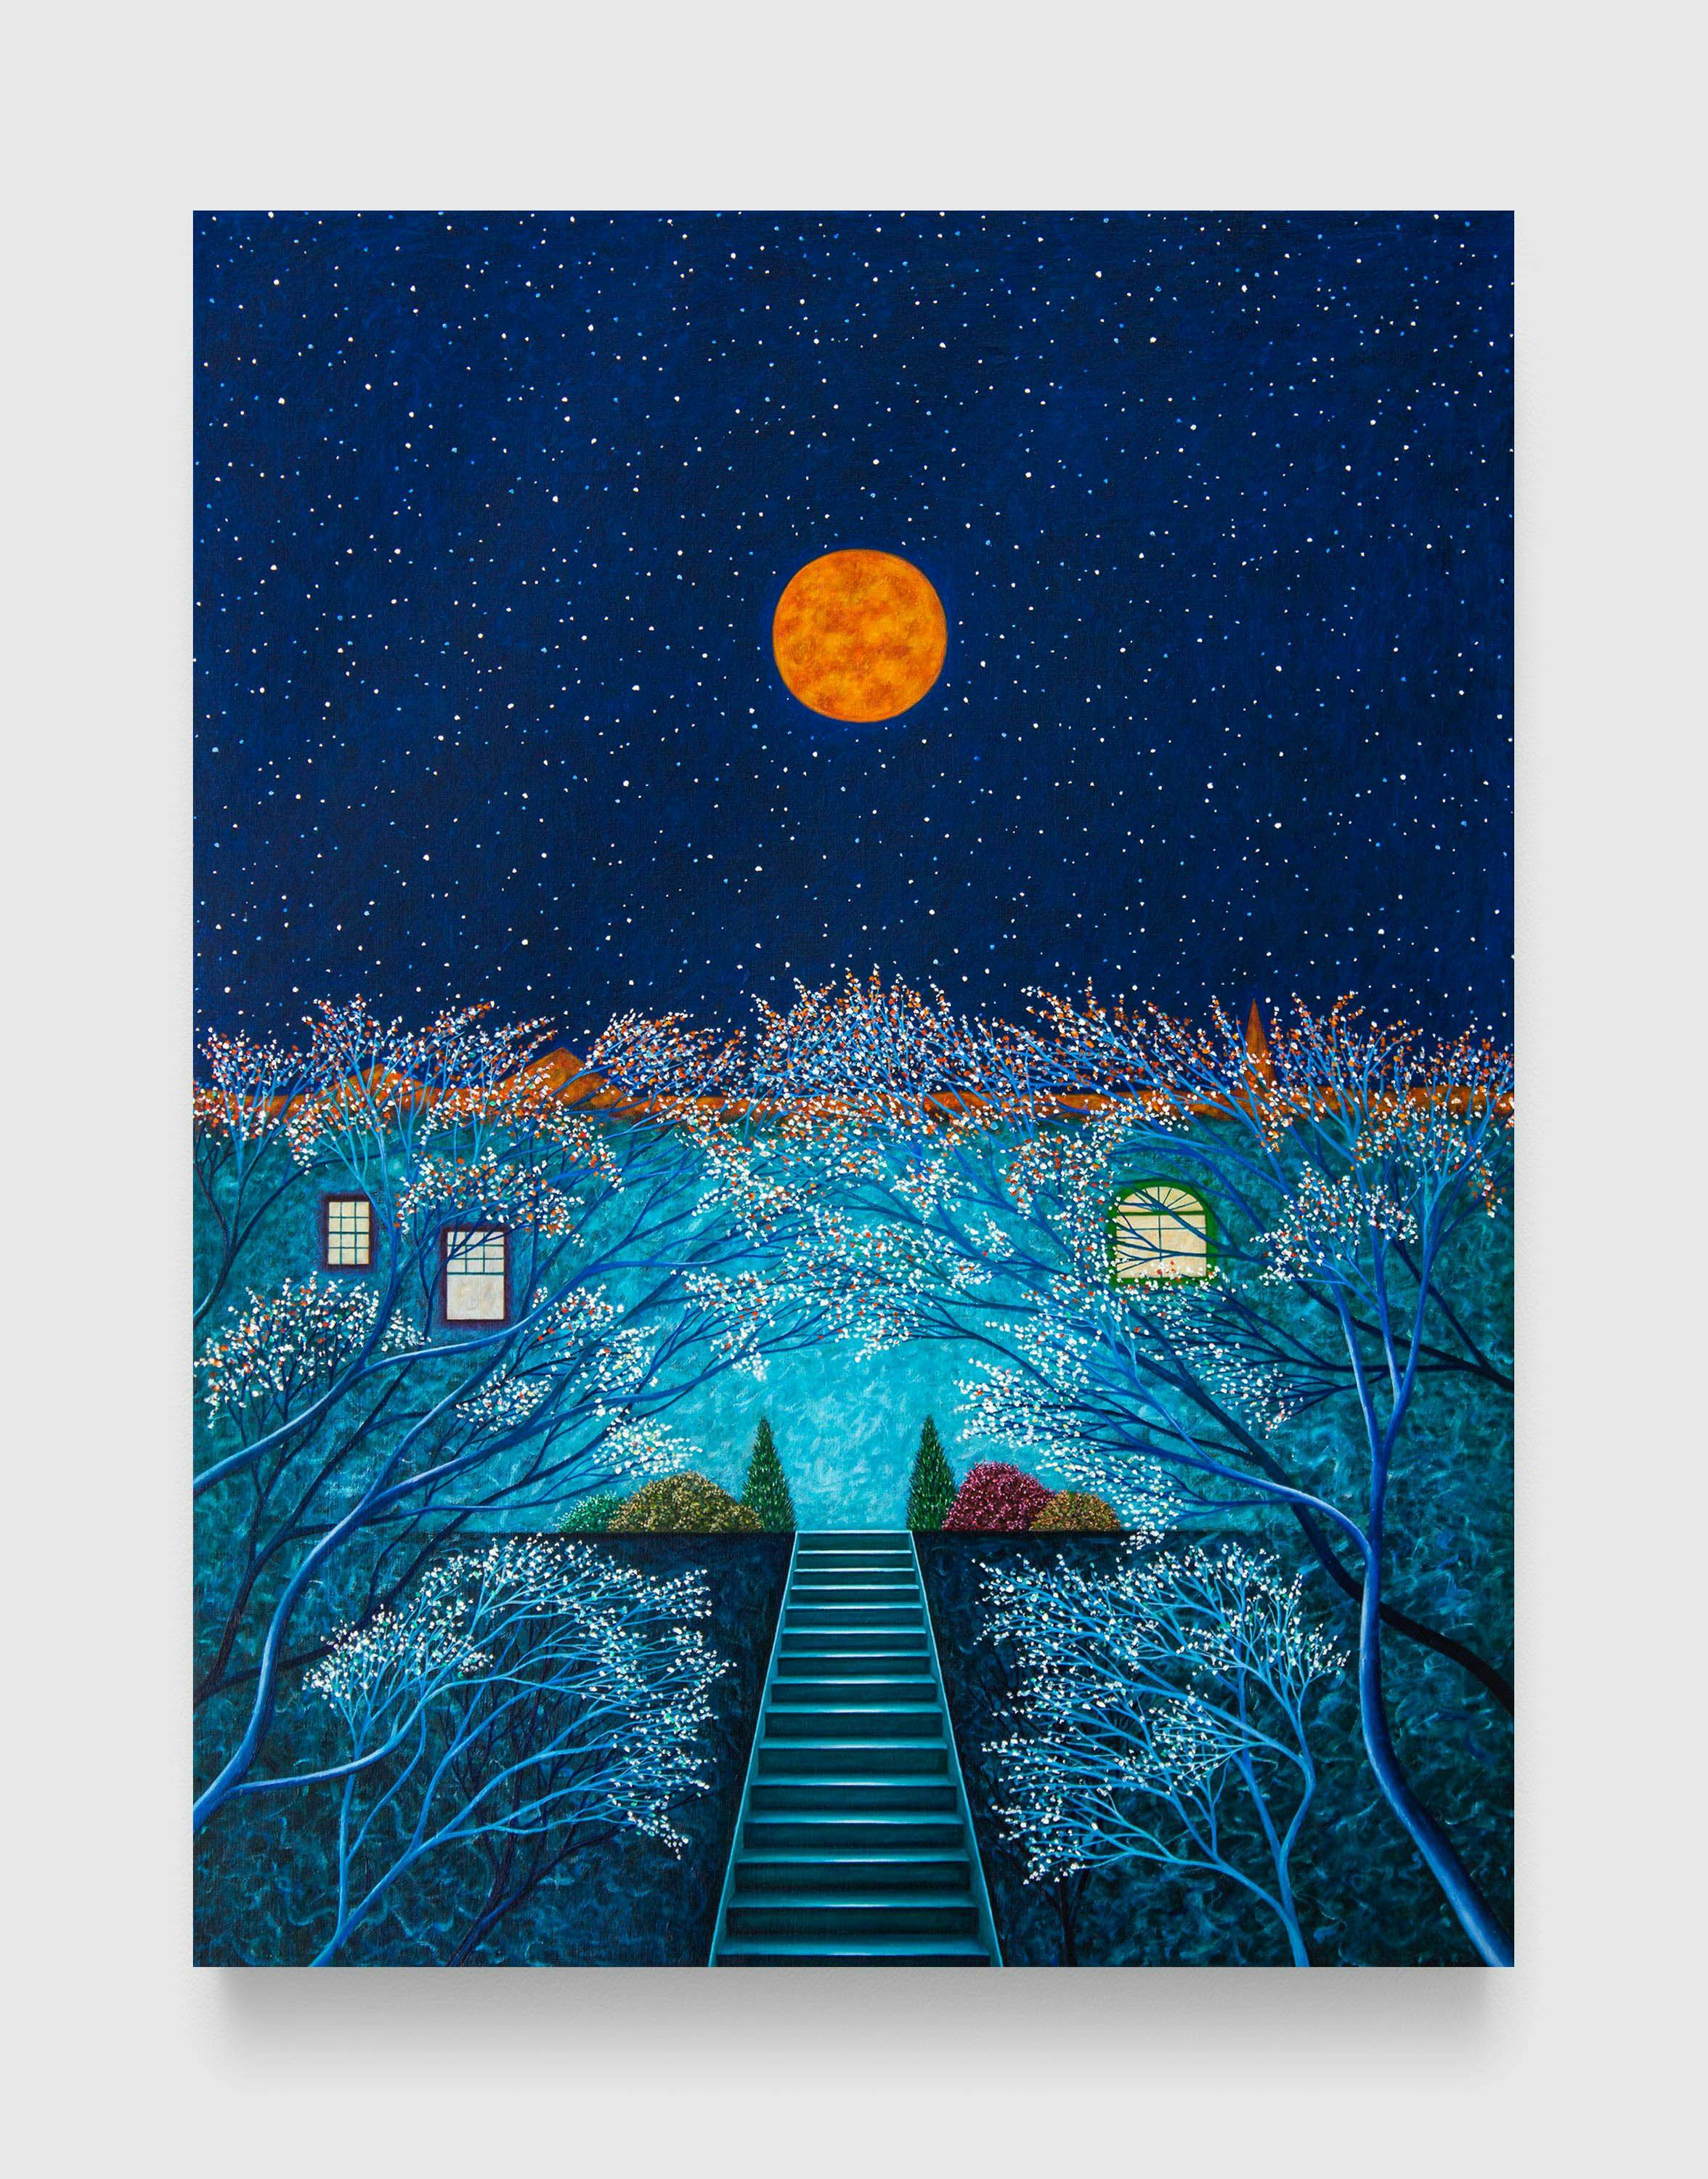 A painting by Scott Kahn, titled For Matthew, Spring Moon, dated 2019.